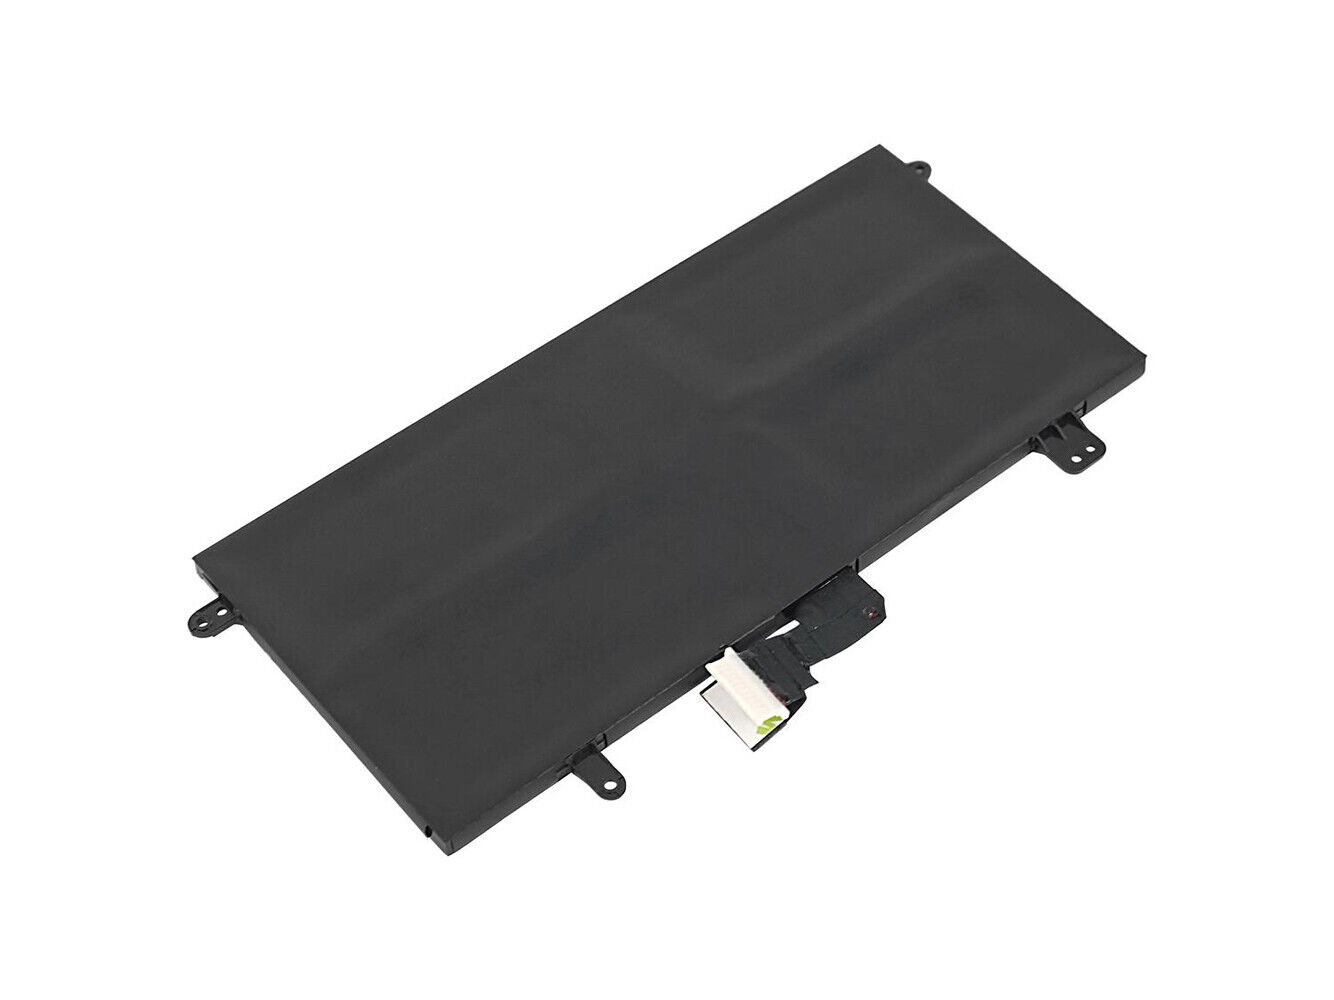 Accu voor 7.6V 5YHR4 GJKNX 3DDDG DY9NT Dell Precision 3520 3530 M3520(compatible)